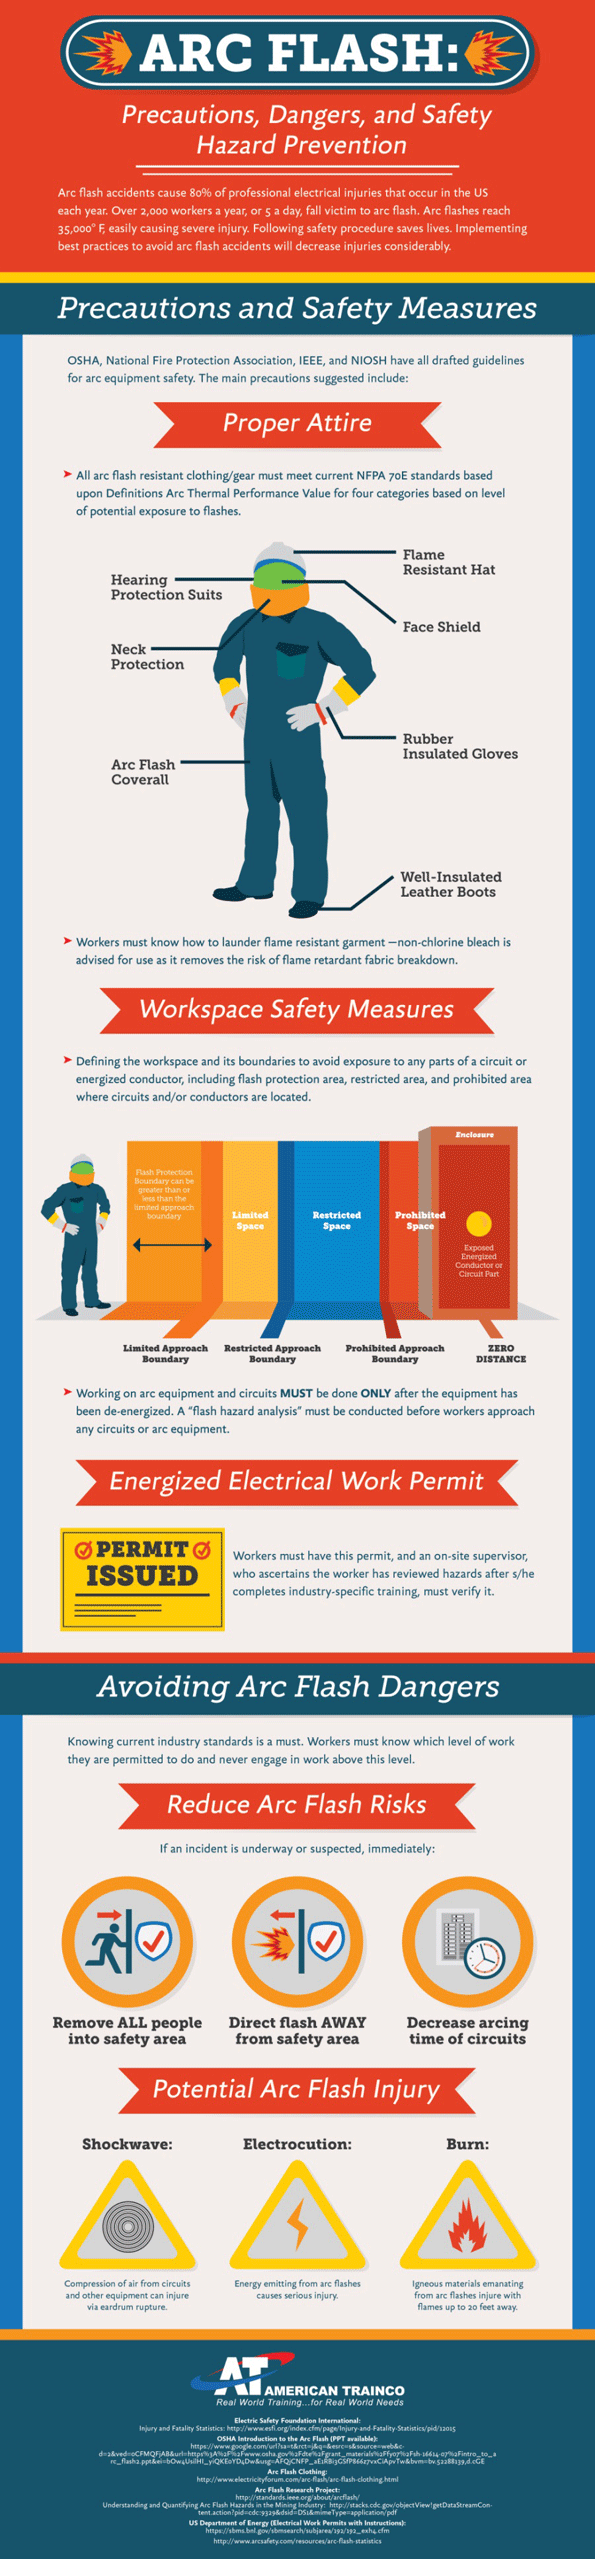 Arc Flash Hazards Infographic Precautions and Safety Measures